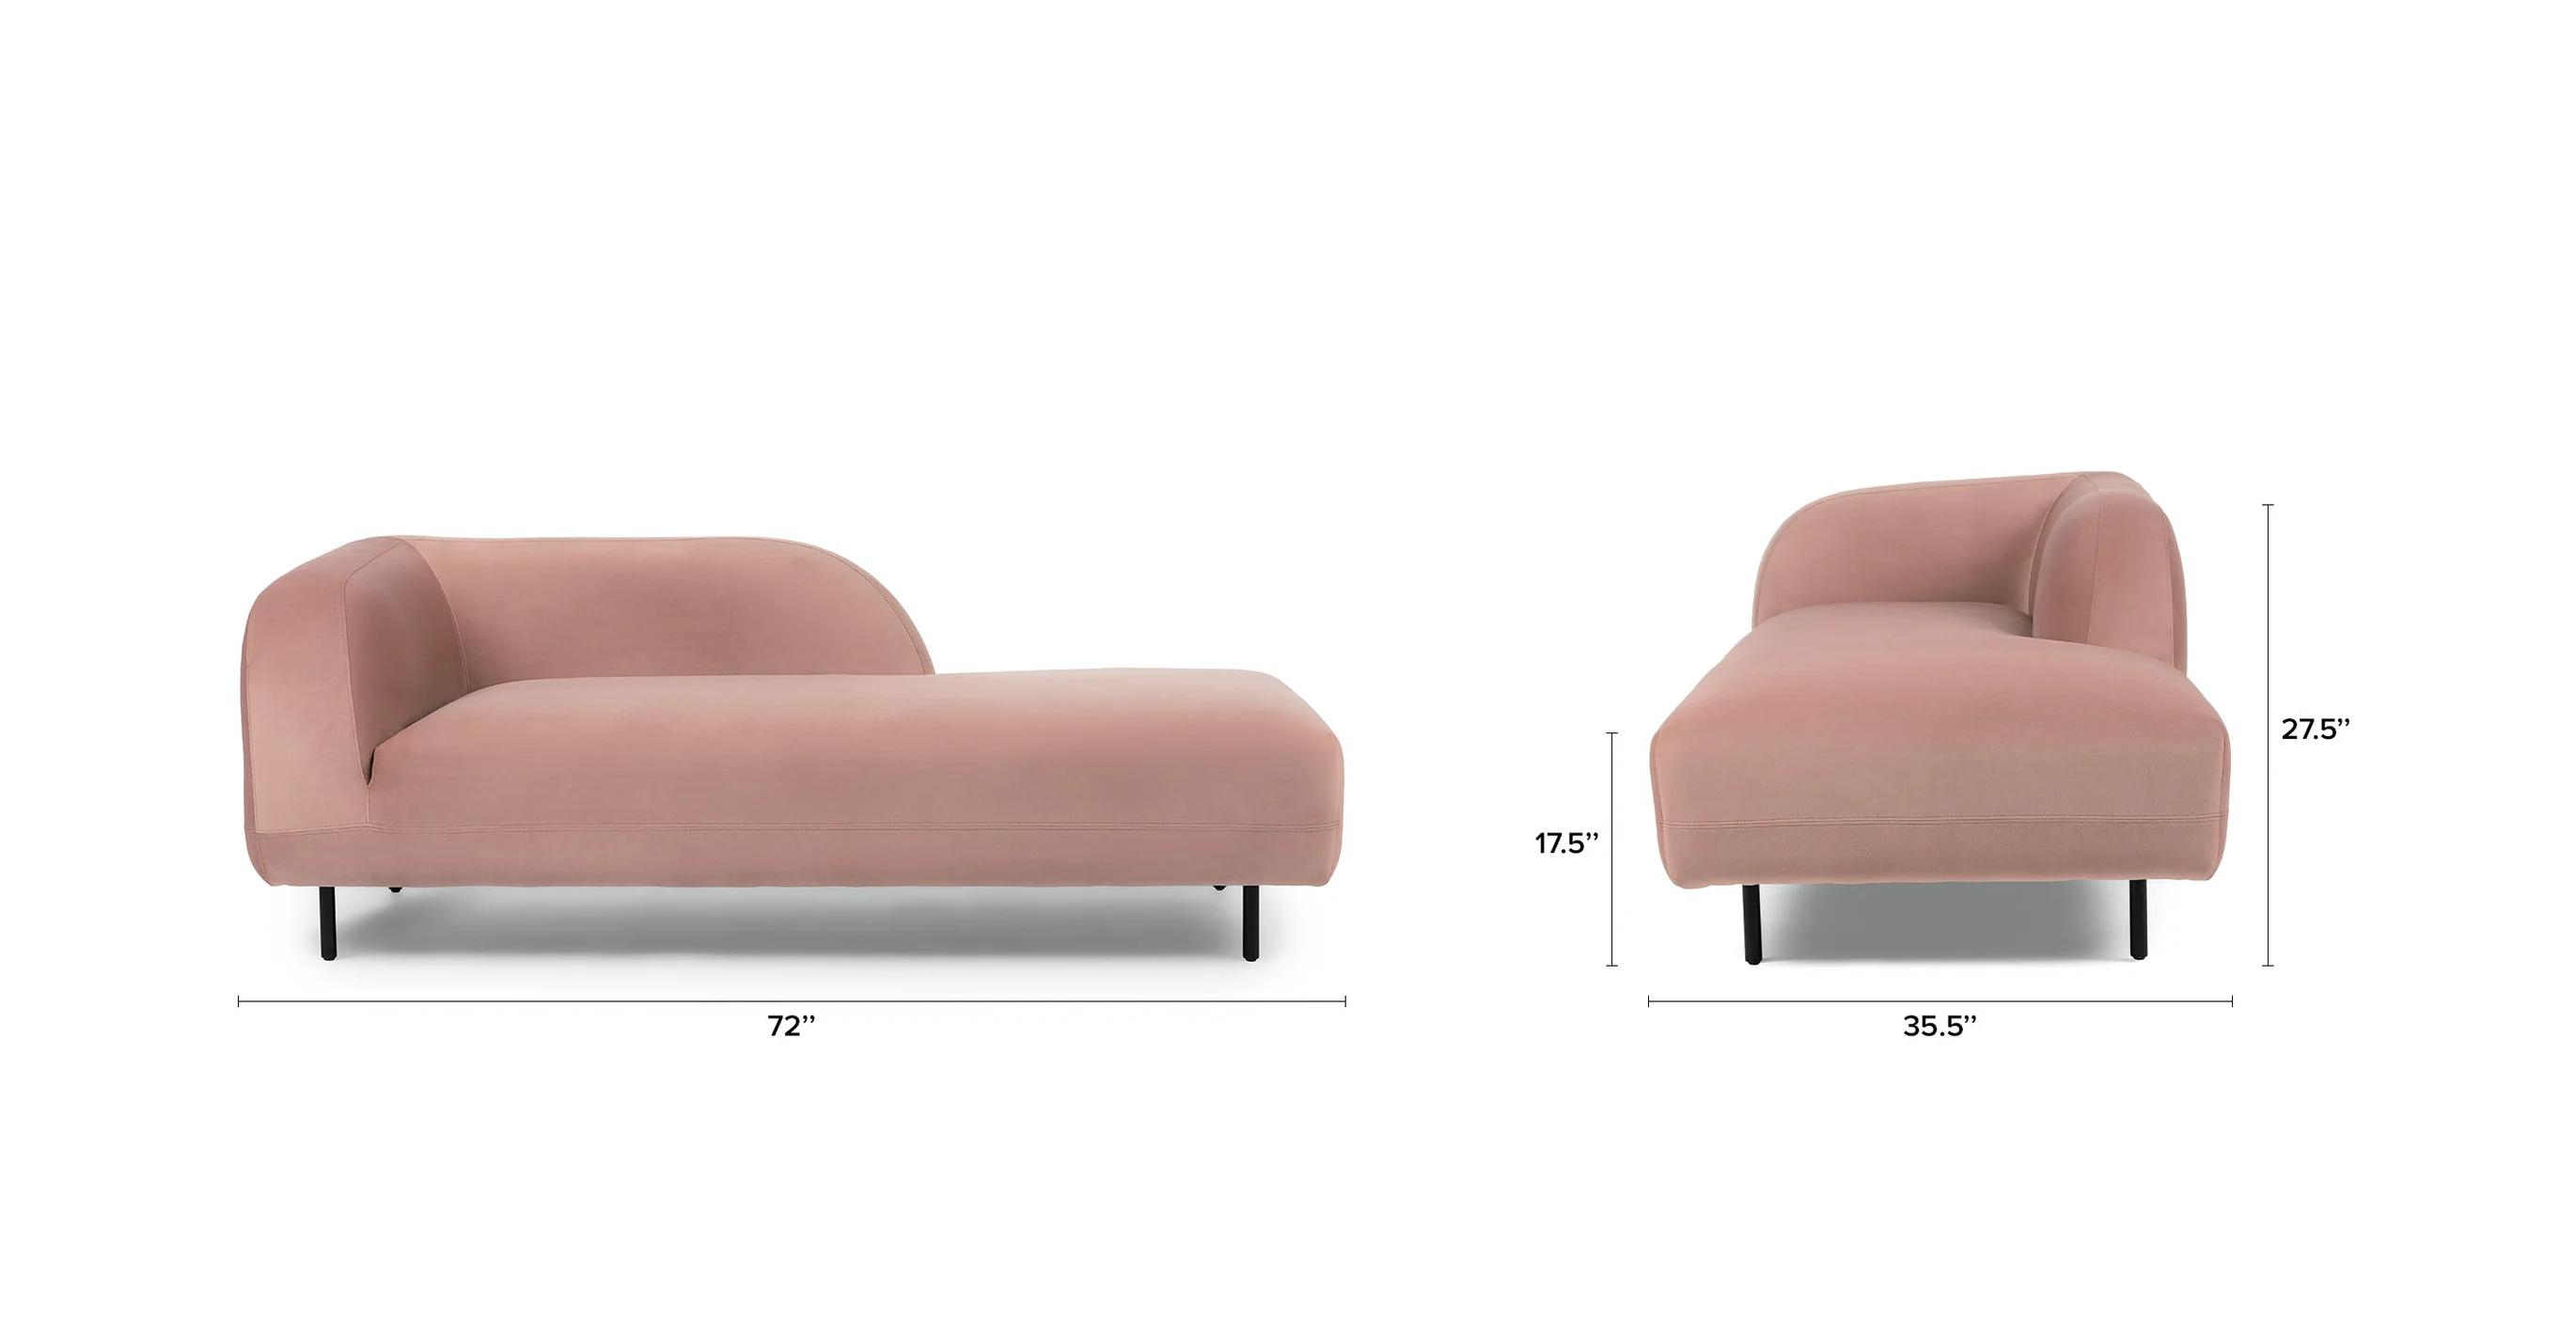 Lupra Daybed, Hibiscus Pink - Image 8